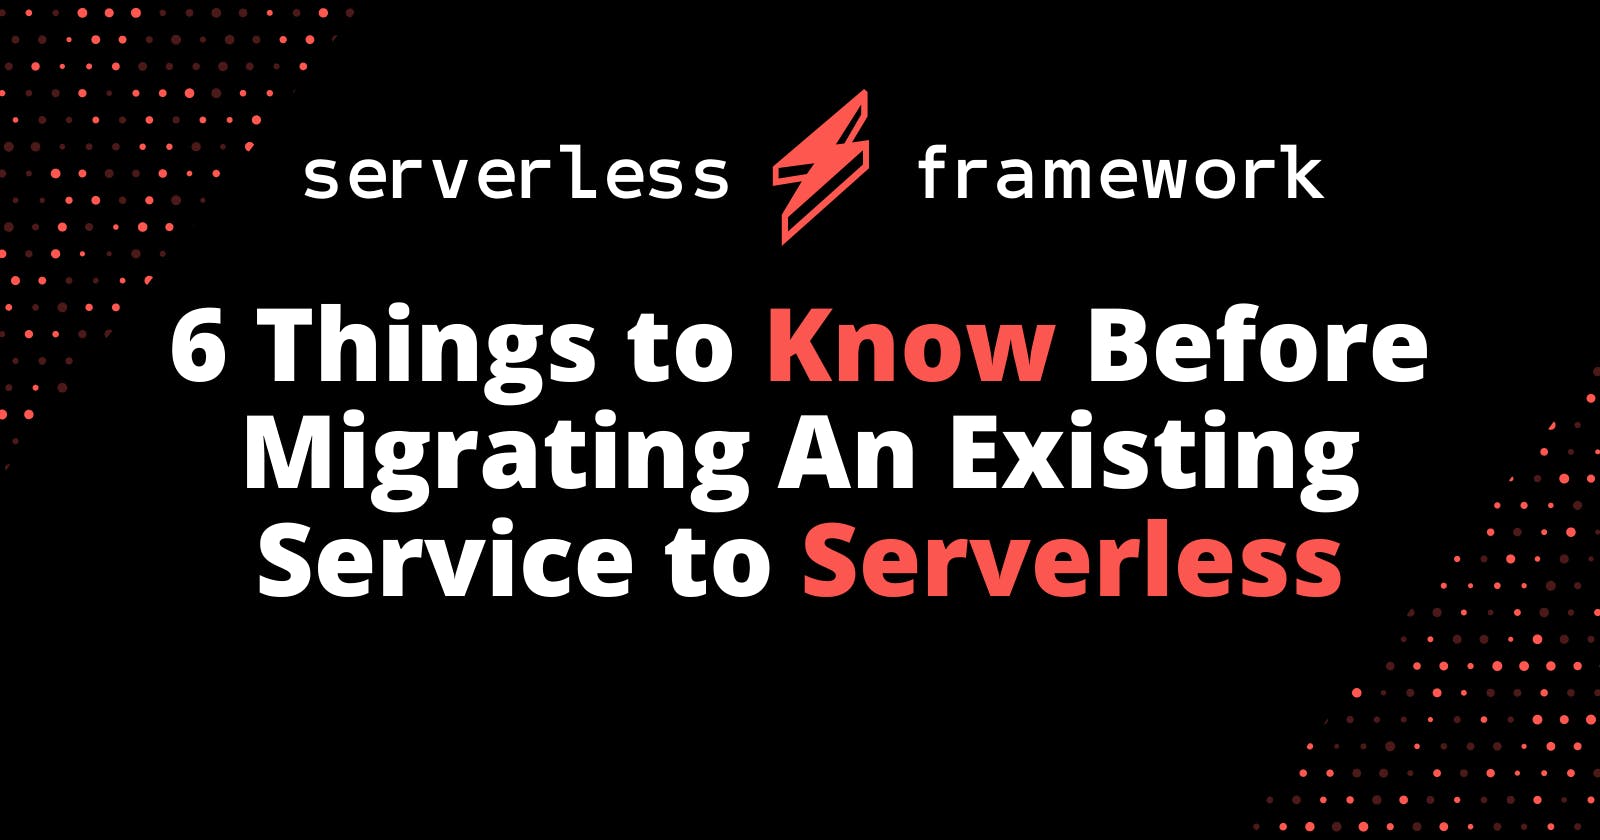 6 Things to Know Before Migrating An Existing Service to Serverless